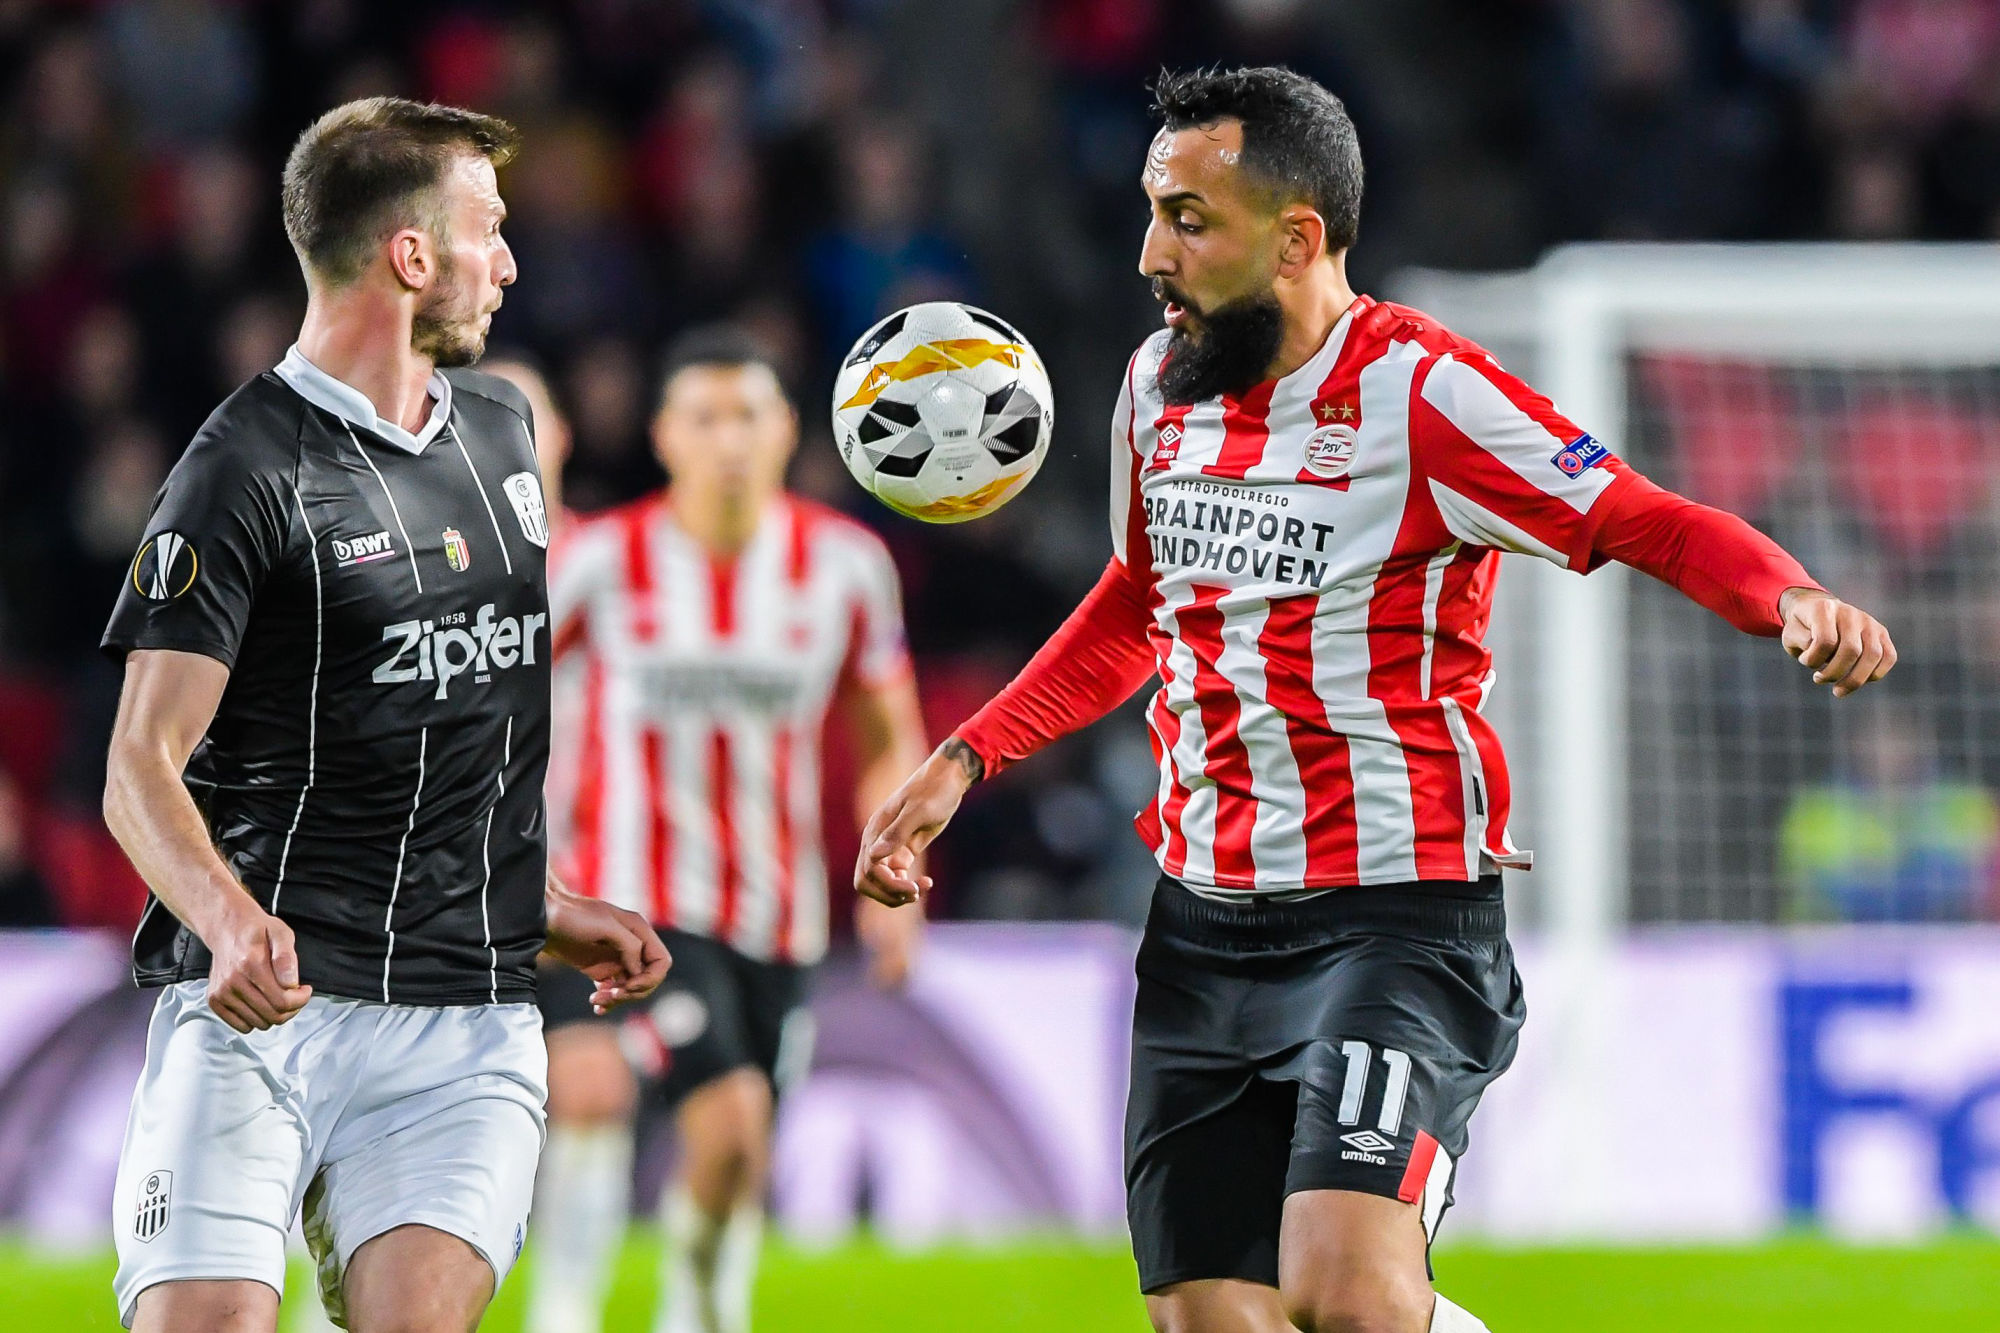 (L-R) Petar Filipovic of Lask Linz, Konstantinos Mitroglou of PSV during the UEFA Europa League group D match between PSV Eindhoven and LASK at the PSV stadium on October 24, 2019 in Eindhoven, The Netherlands 

Photo by Icon Sport - Petar FILIPOVIC - Kostas MITROGLOU - Philips Stadion - Eindhoven (Pays Bas)